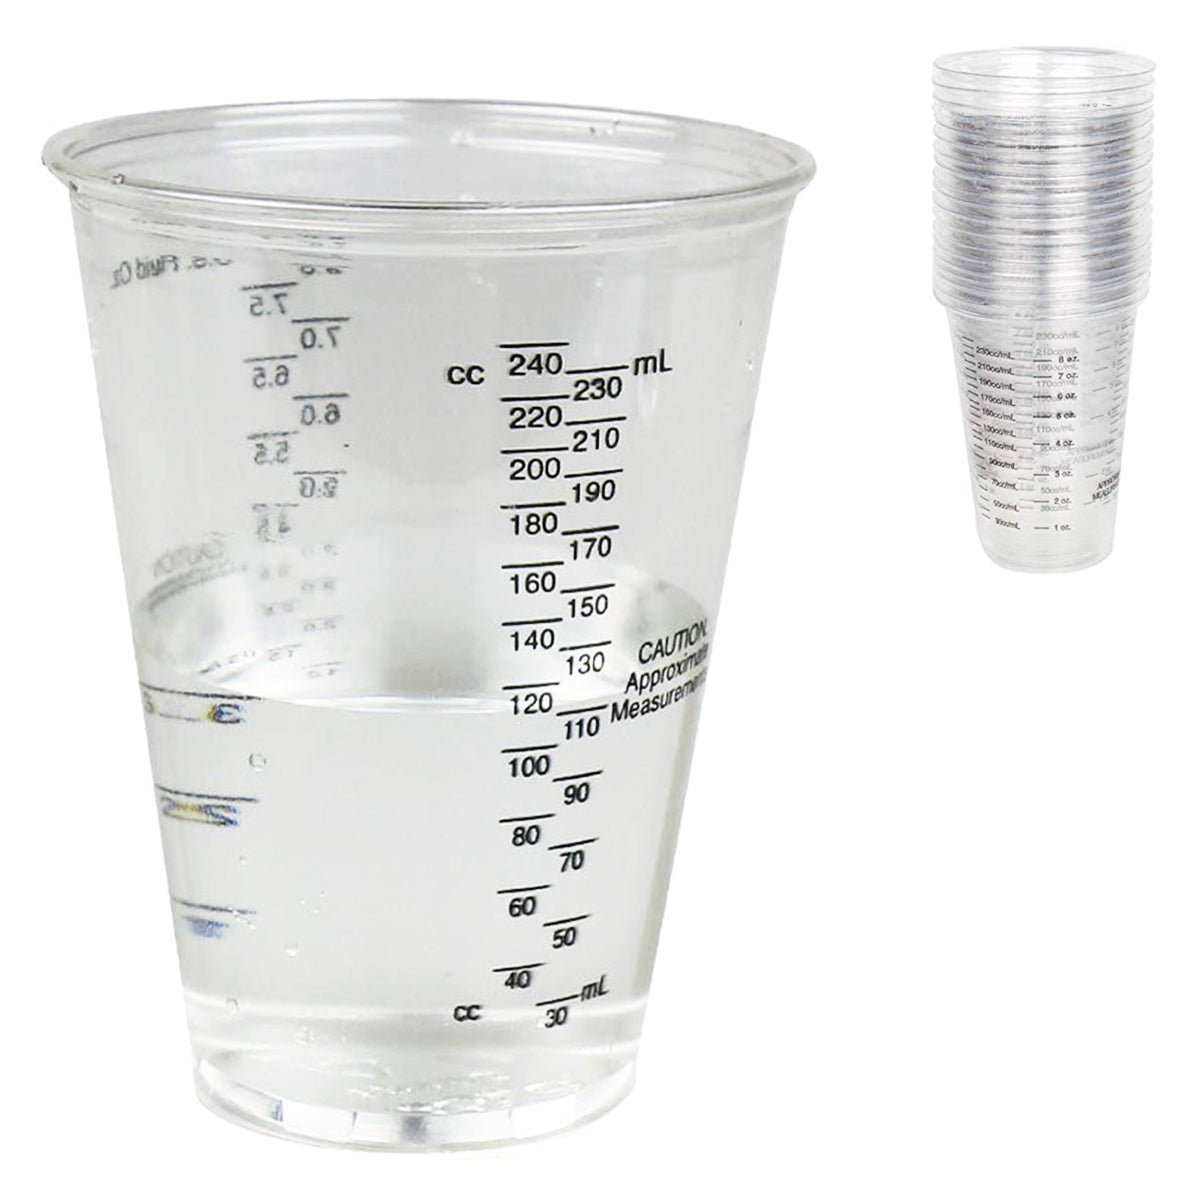 Resin Casting Mixing Cups - 64 oz